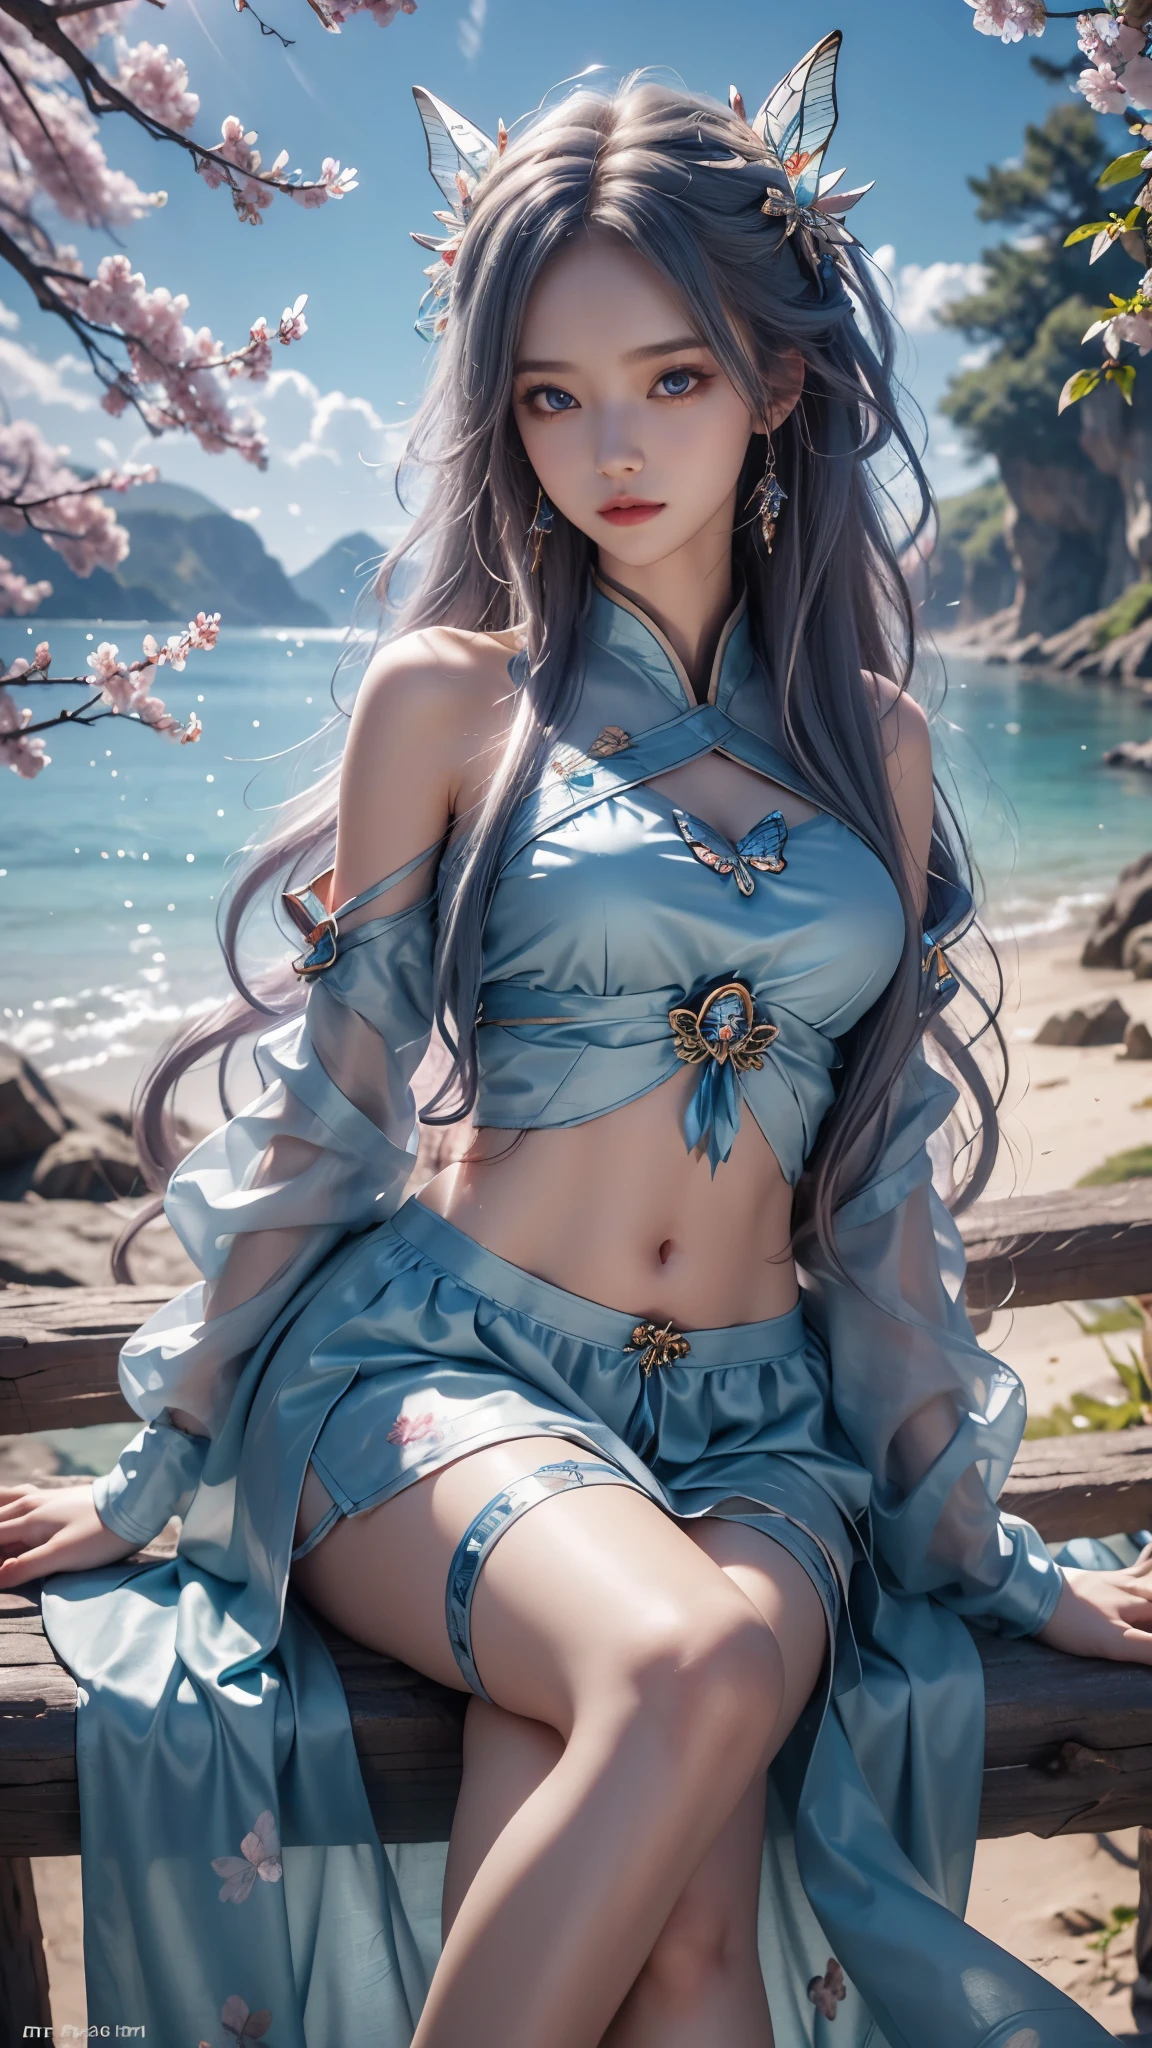 8K, ultra hd, masterpiece, 1 girl, perfect face, close legs, very long curly hair, detailed eyes, simple clothing, gradient blue clothing, bare waist, jwellery, waterside, Realistic scenery, epic scenery, sun rising, evening, clouds, Butterfly, cherry blossom, blowing wind,